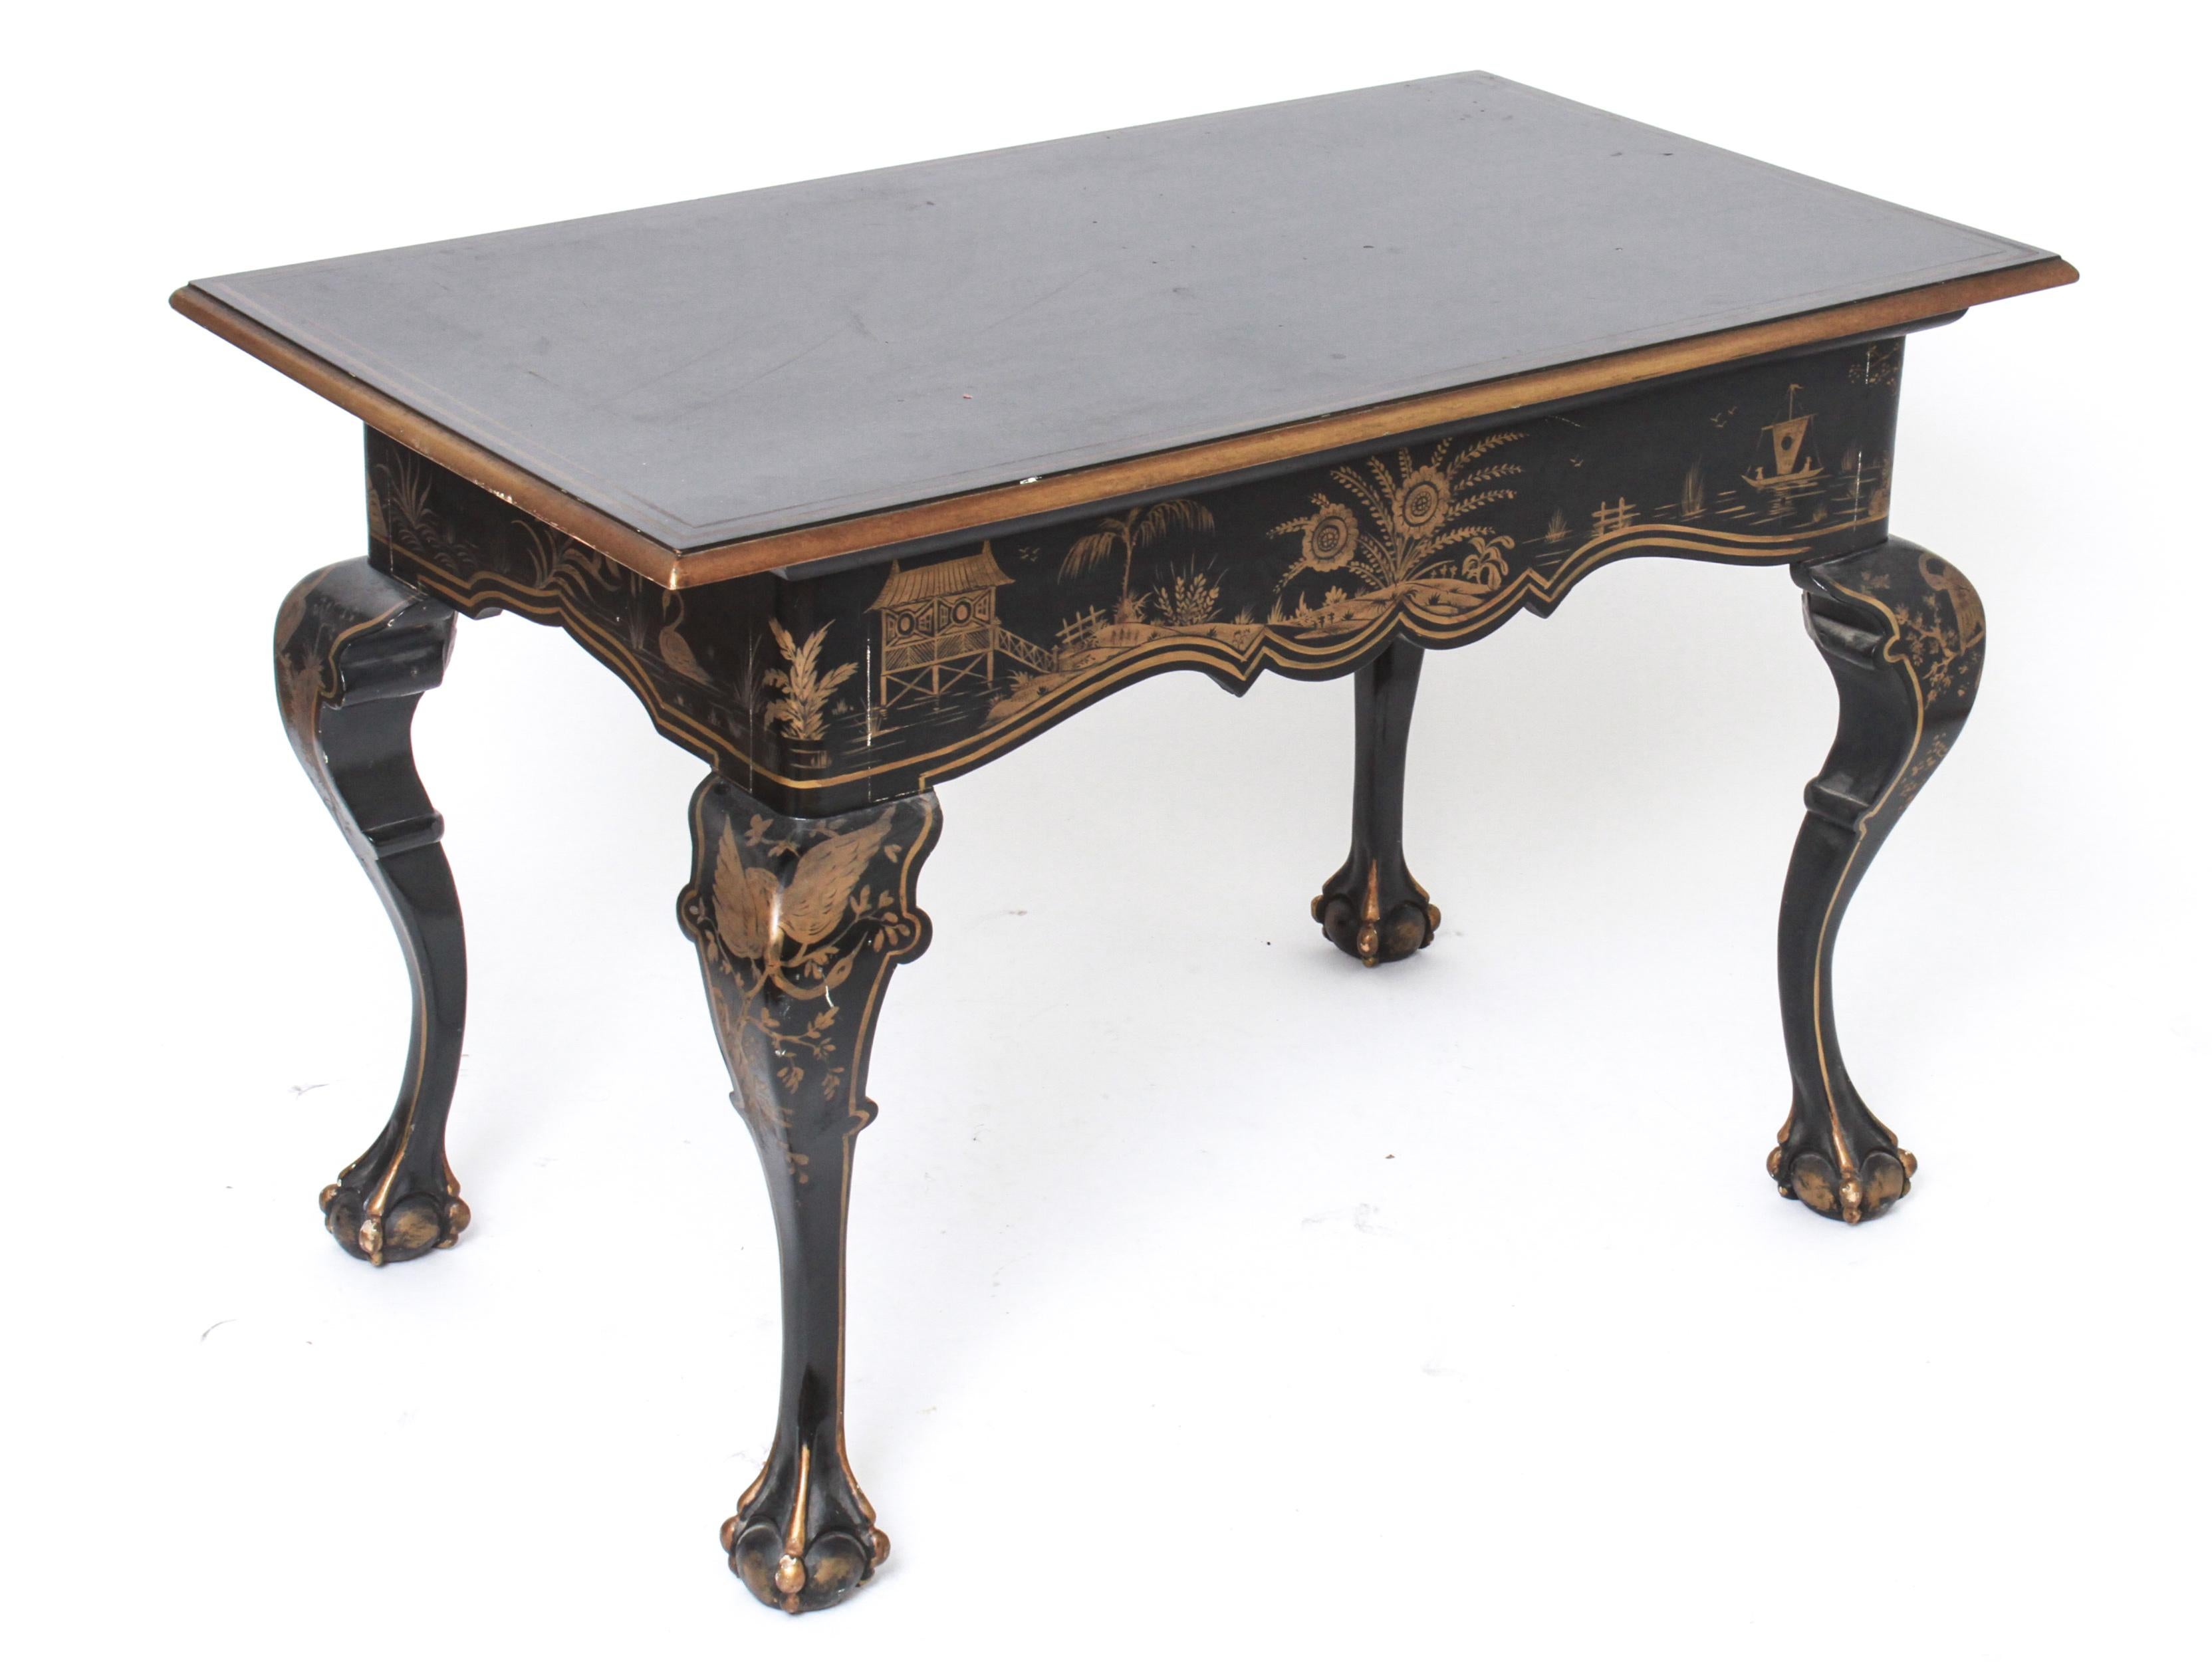 Chippendale style chinoiserie lacquered desk with a rectangular top over three pull drawers. The piece has cabriole legs with ball and claw feet. Some minor flaking and craquelure to the lacquer surface. In great vintage condition with